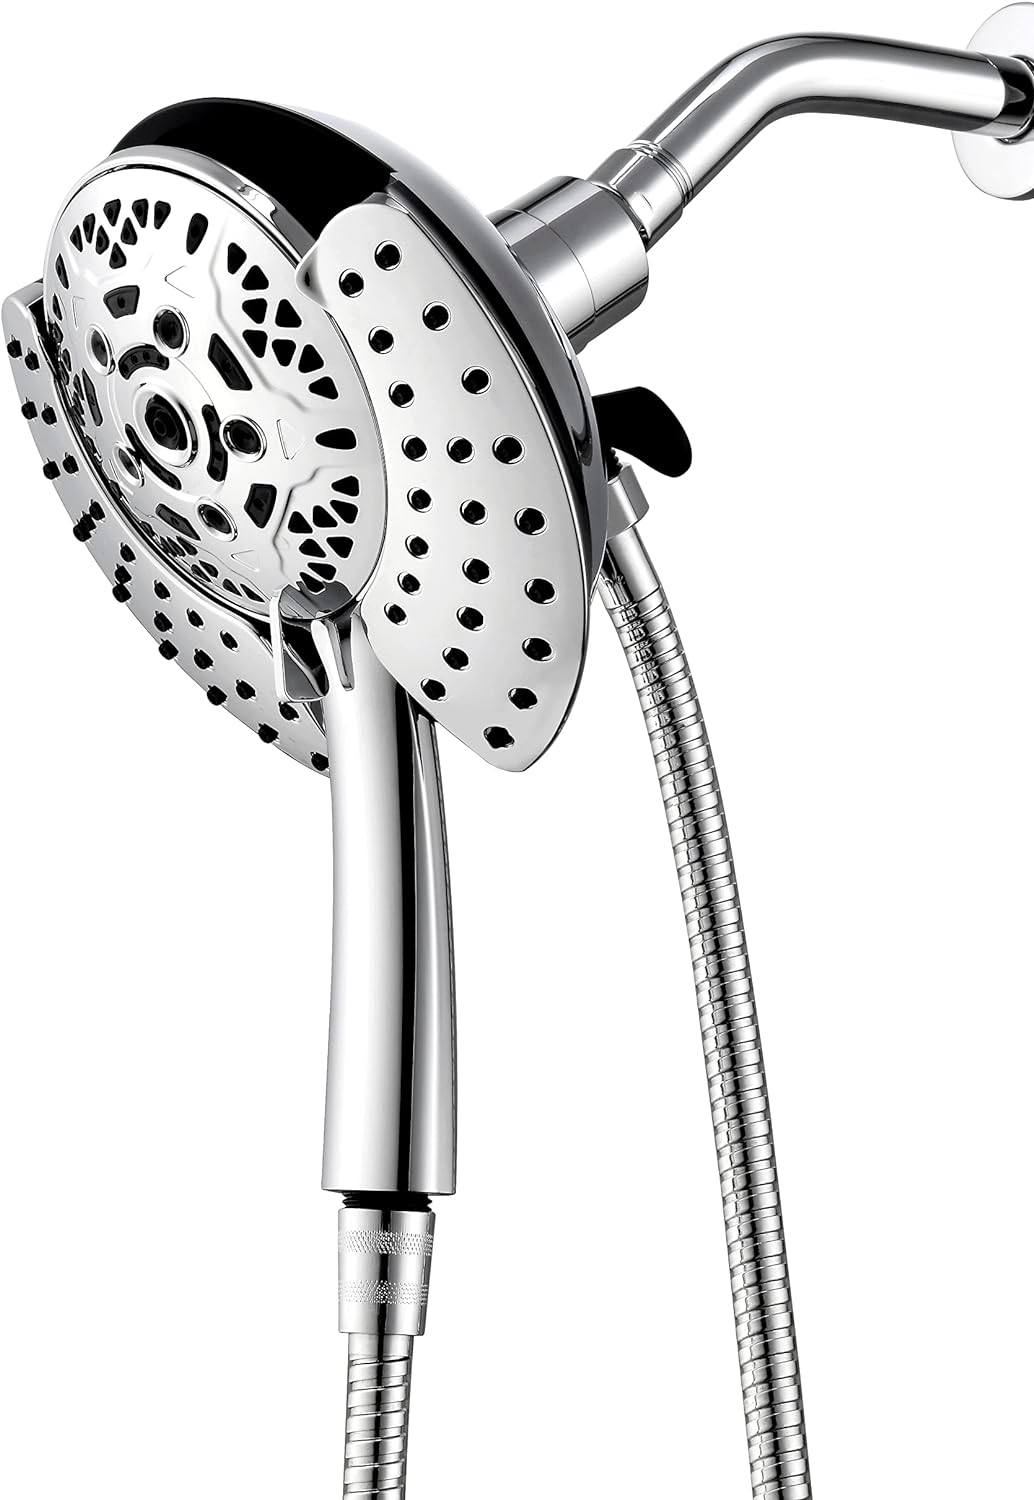 Shower Head with Handheld High Pressure: INAVAMZ Hand Held Shower Head & Rain Shower Head 2-IN-1 Shower Head with 59